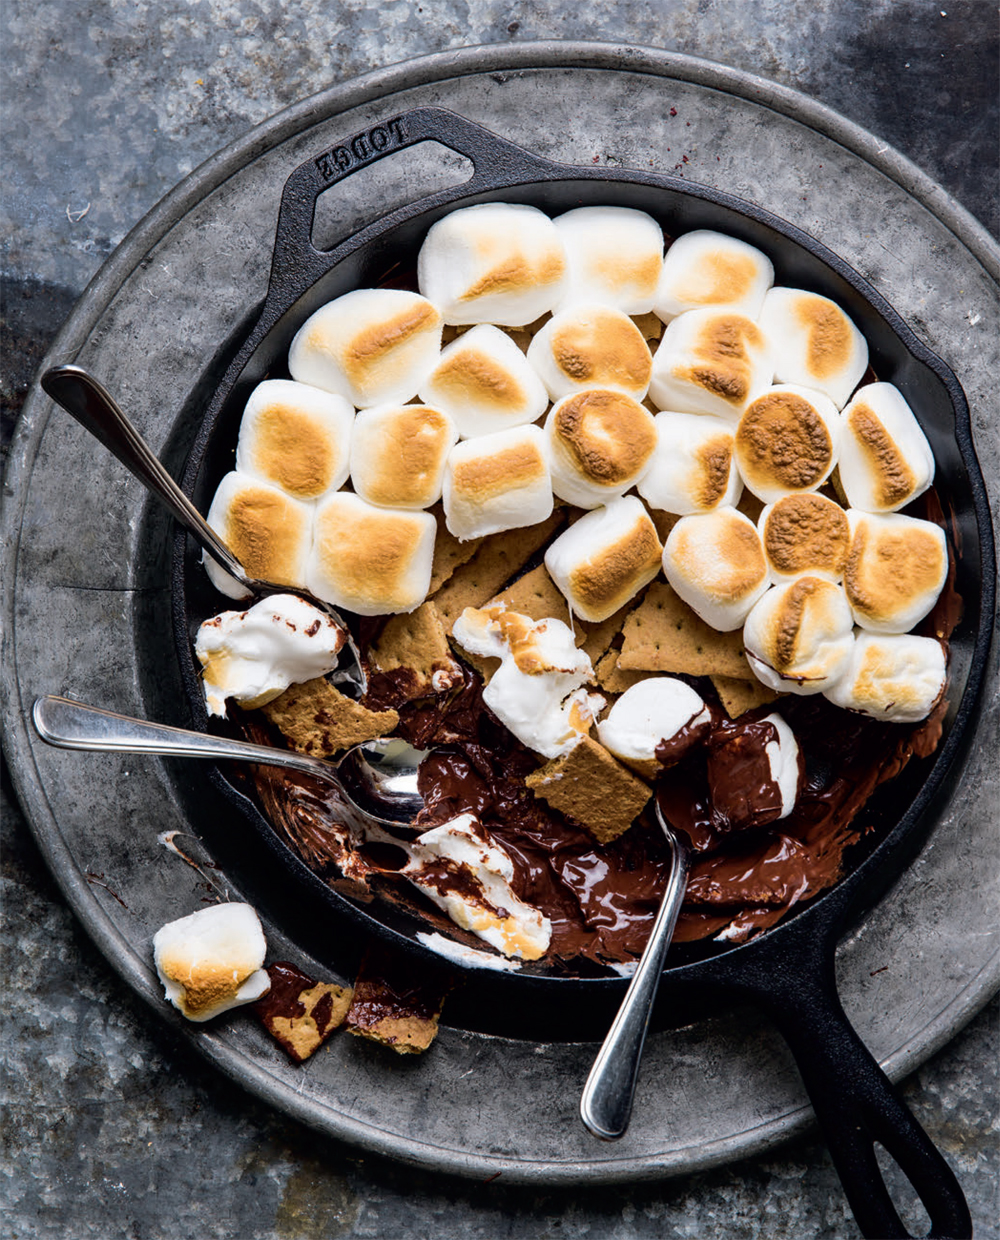 S’mores oven-style recipe